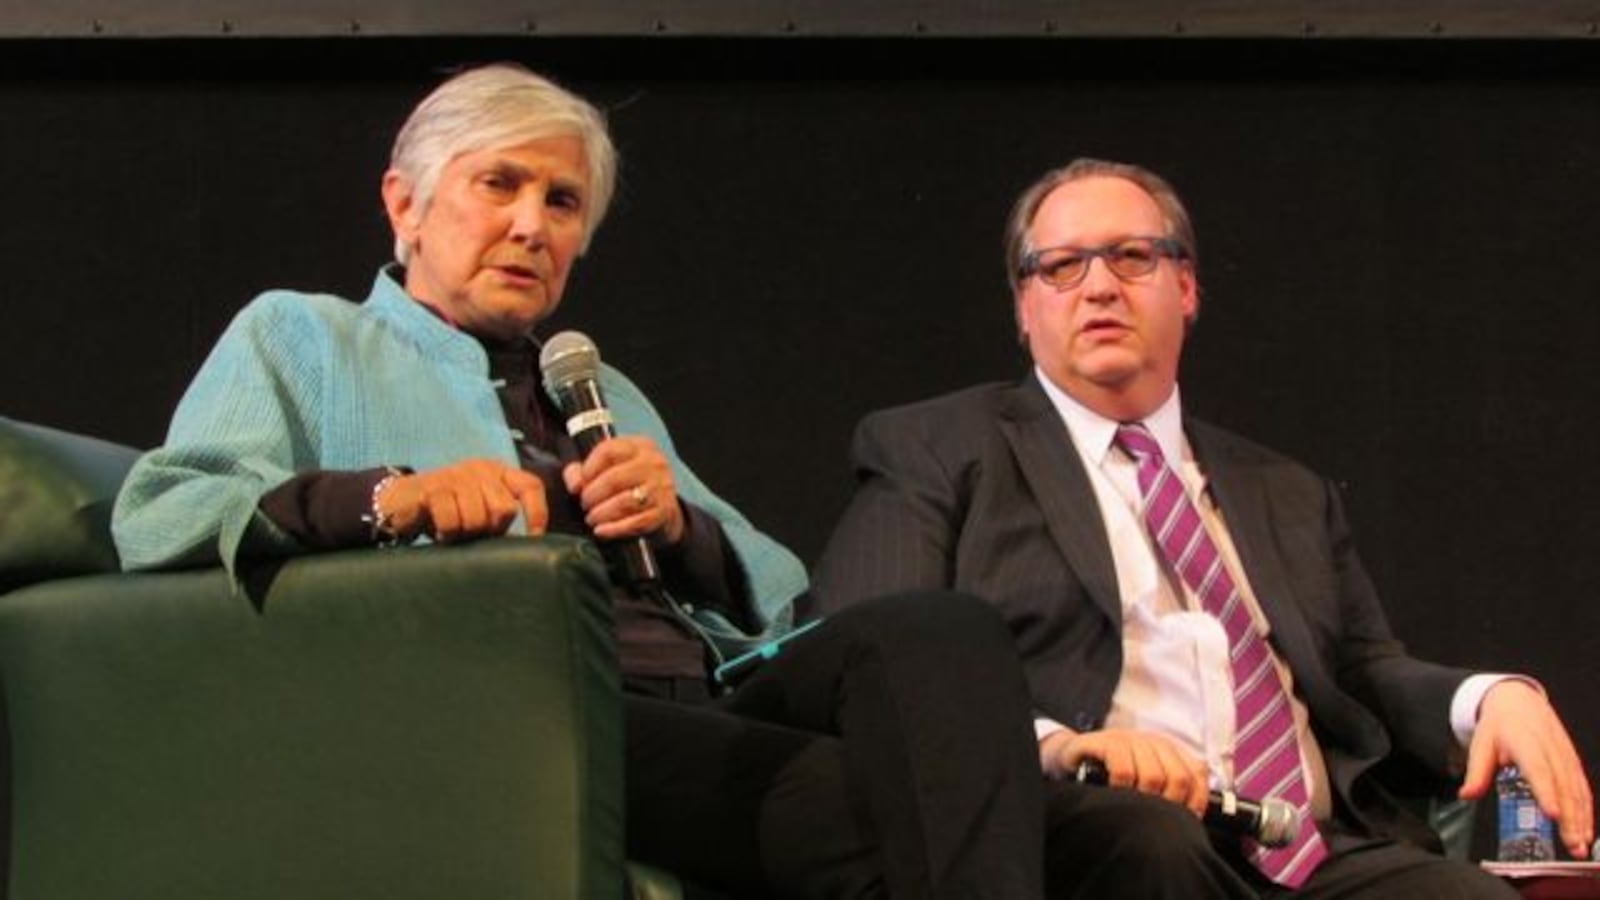 Education historian Diane Ravitch and Friedman Foundation CEO Robert Enlow debated at Butler University last March.